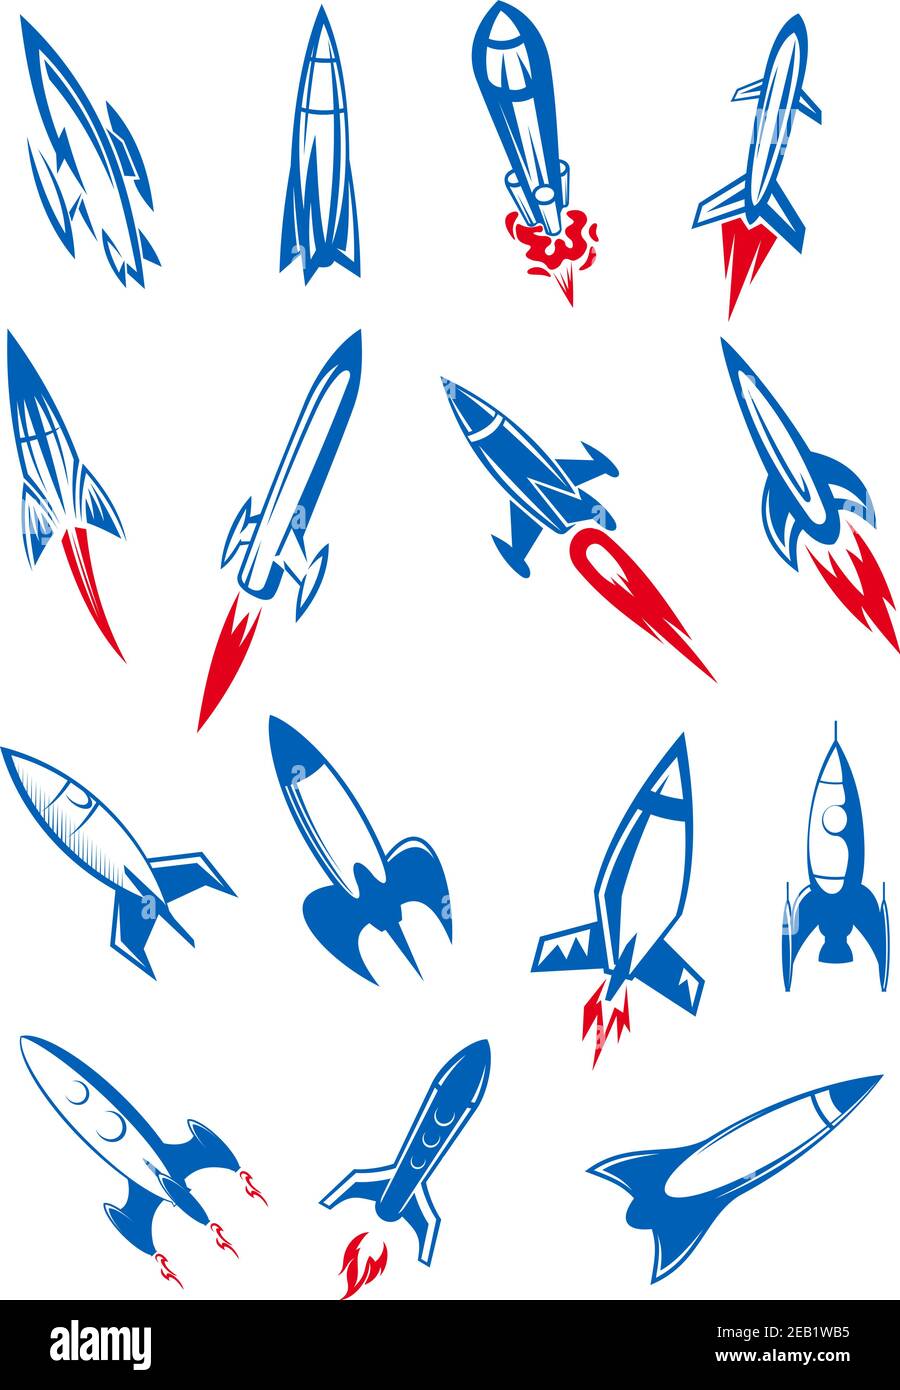 Blue flying space rockets or spaceships and missiles with red flaming tracks in retro cartoon style for logo or emblem design Stock Vector